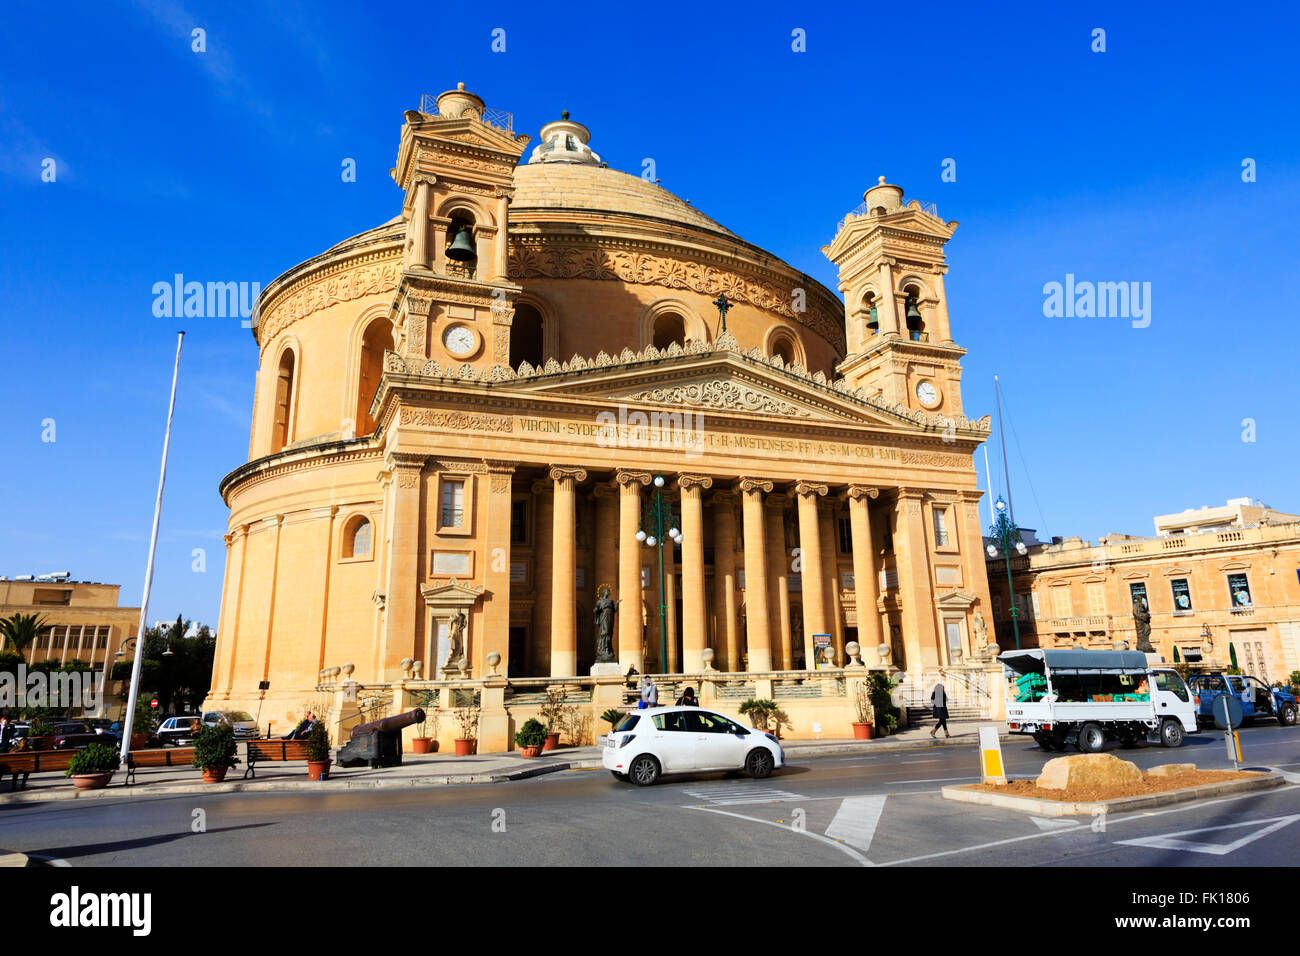 The church of the Assumption of Our Lady, known as the Mosta rotunda or Mosta Dome. Stock Photo